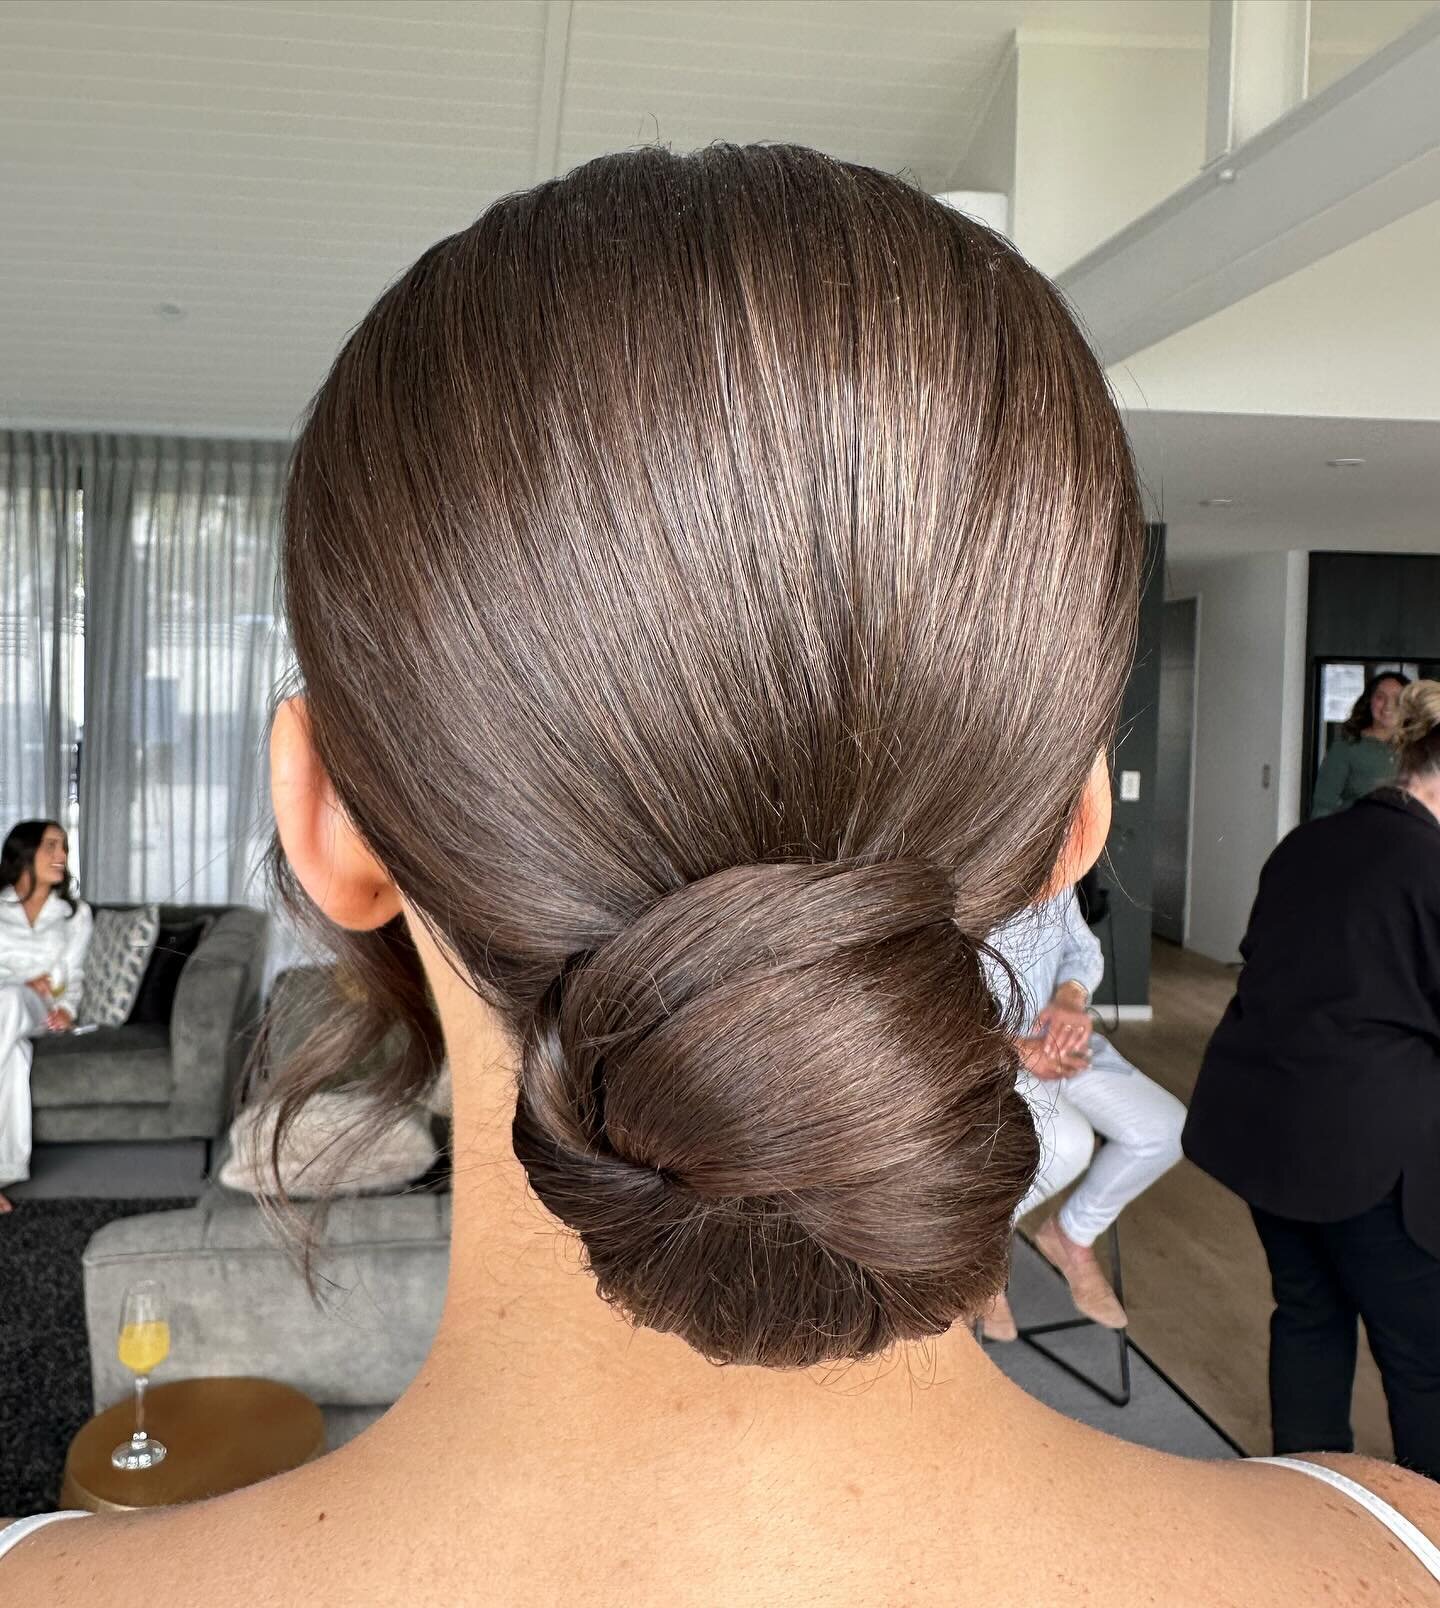 So shiny ✨ 

Prepped the hair with @colorwowhair Dream Coat Supernatural Spray for the ultimate shine on this polished look ❤️

#Beyondtheponytail #maneaddicts #kaleocollective #colorwow #haircarenz #queenstownwedding #queenstownbride #nzwedding #nzb